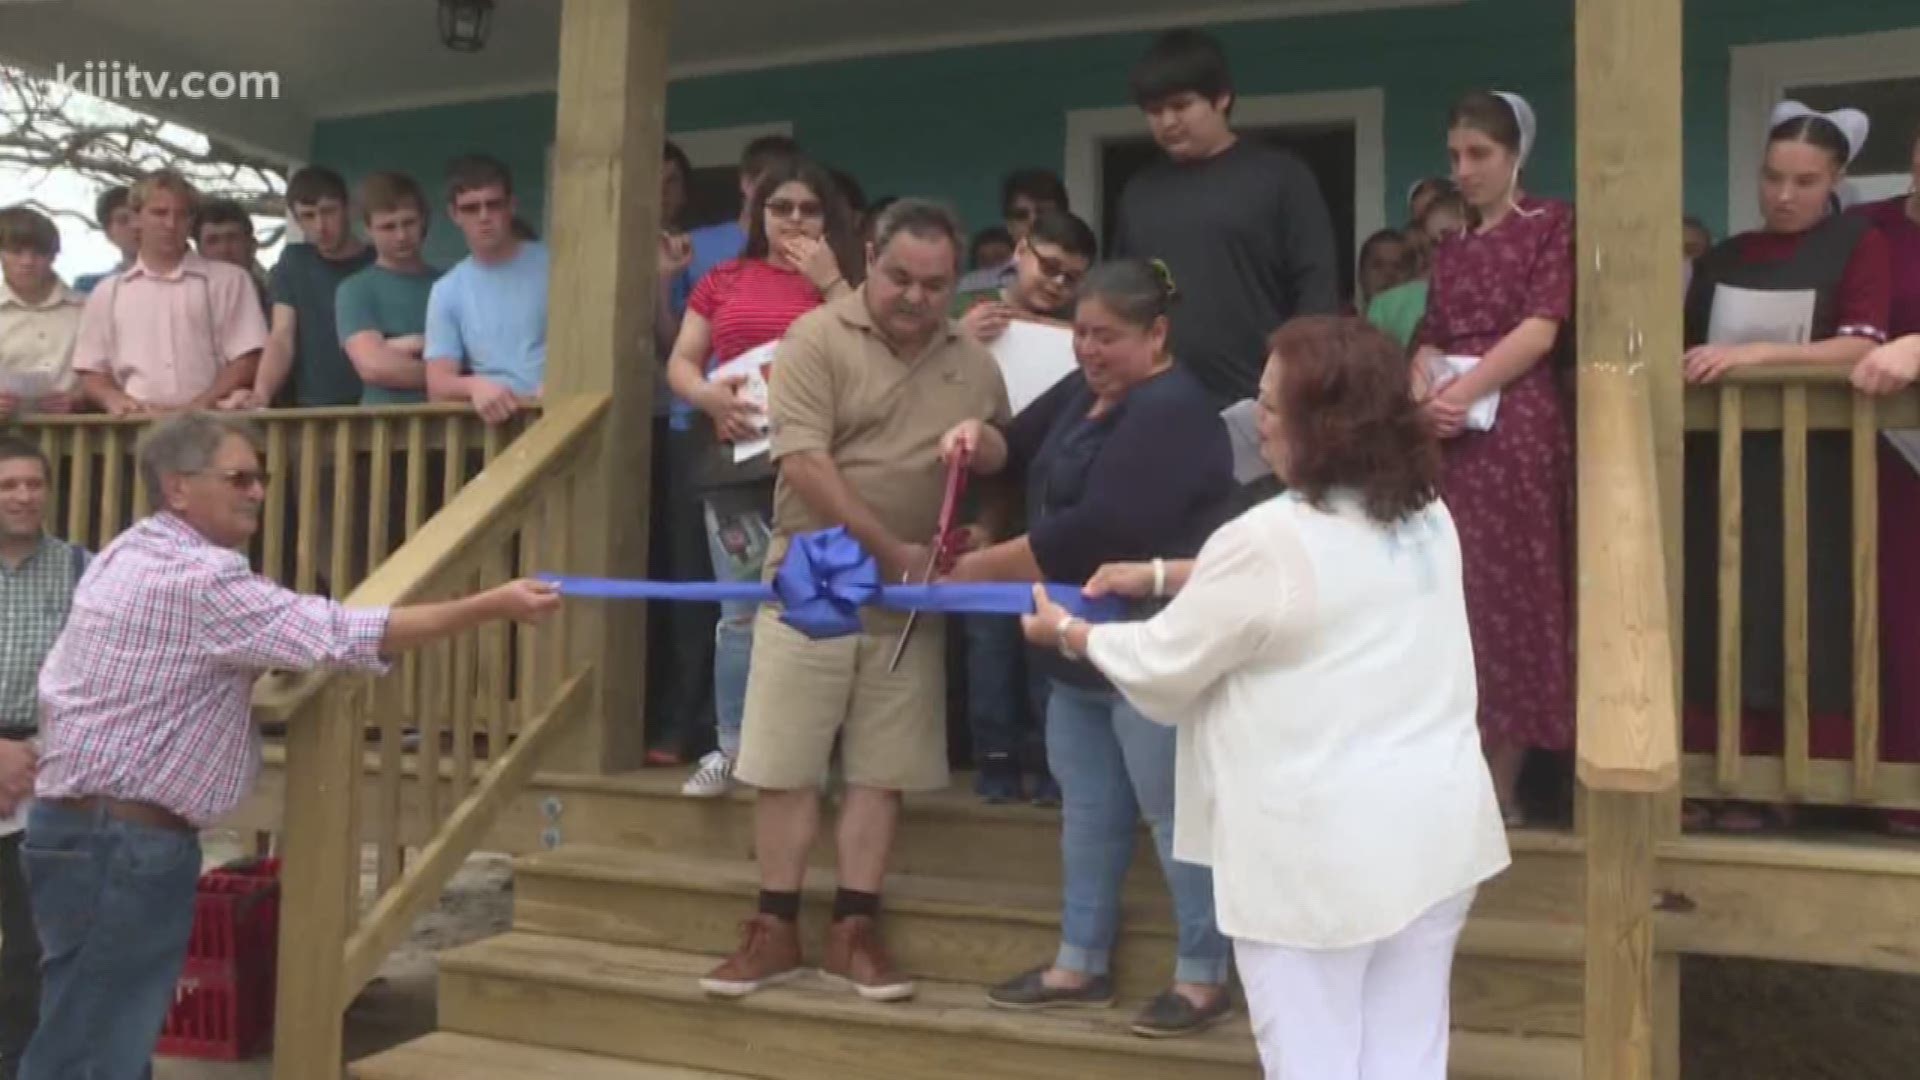 A family in Aransas Pass was able to move into their new home Friday thanks to a group of disaster recovery organizations.